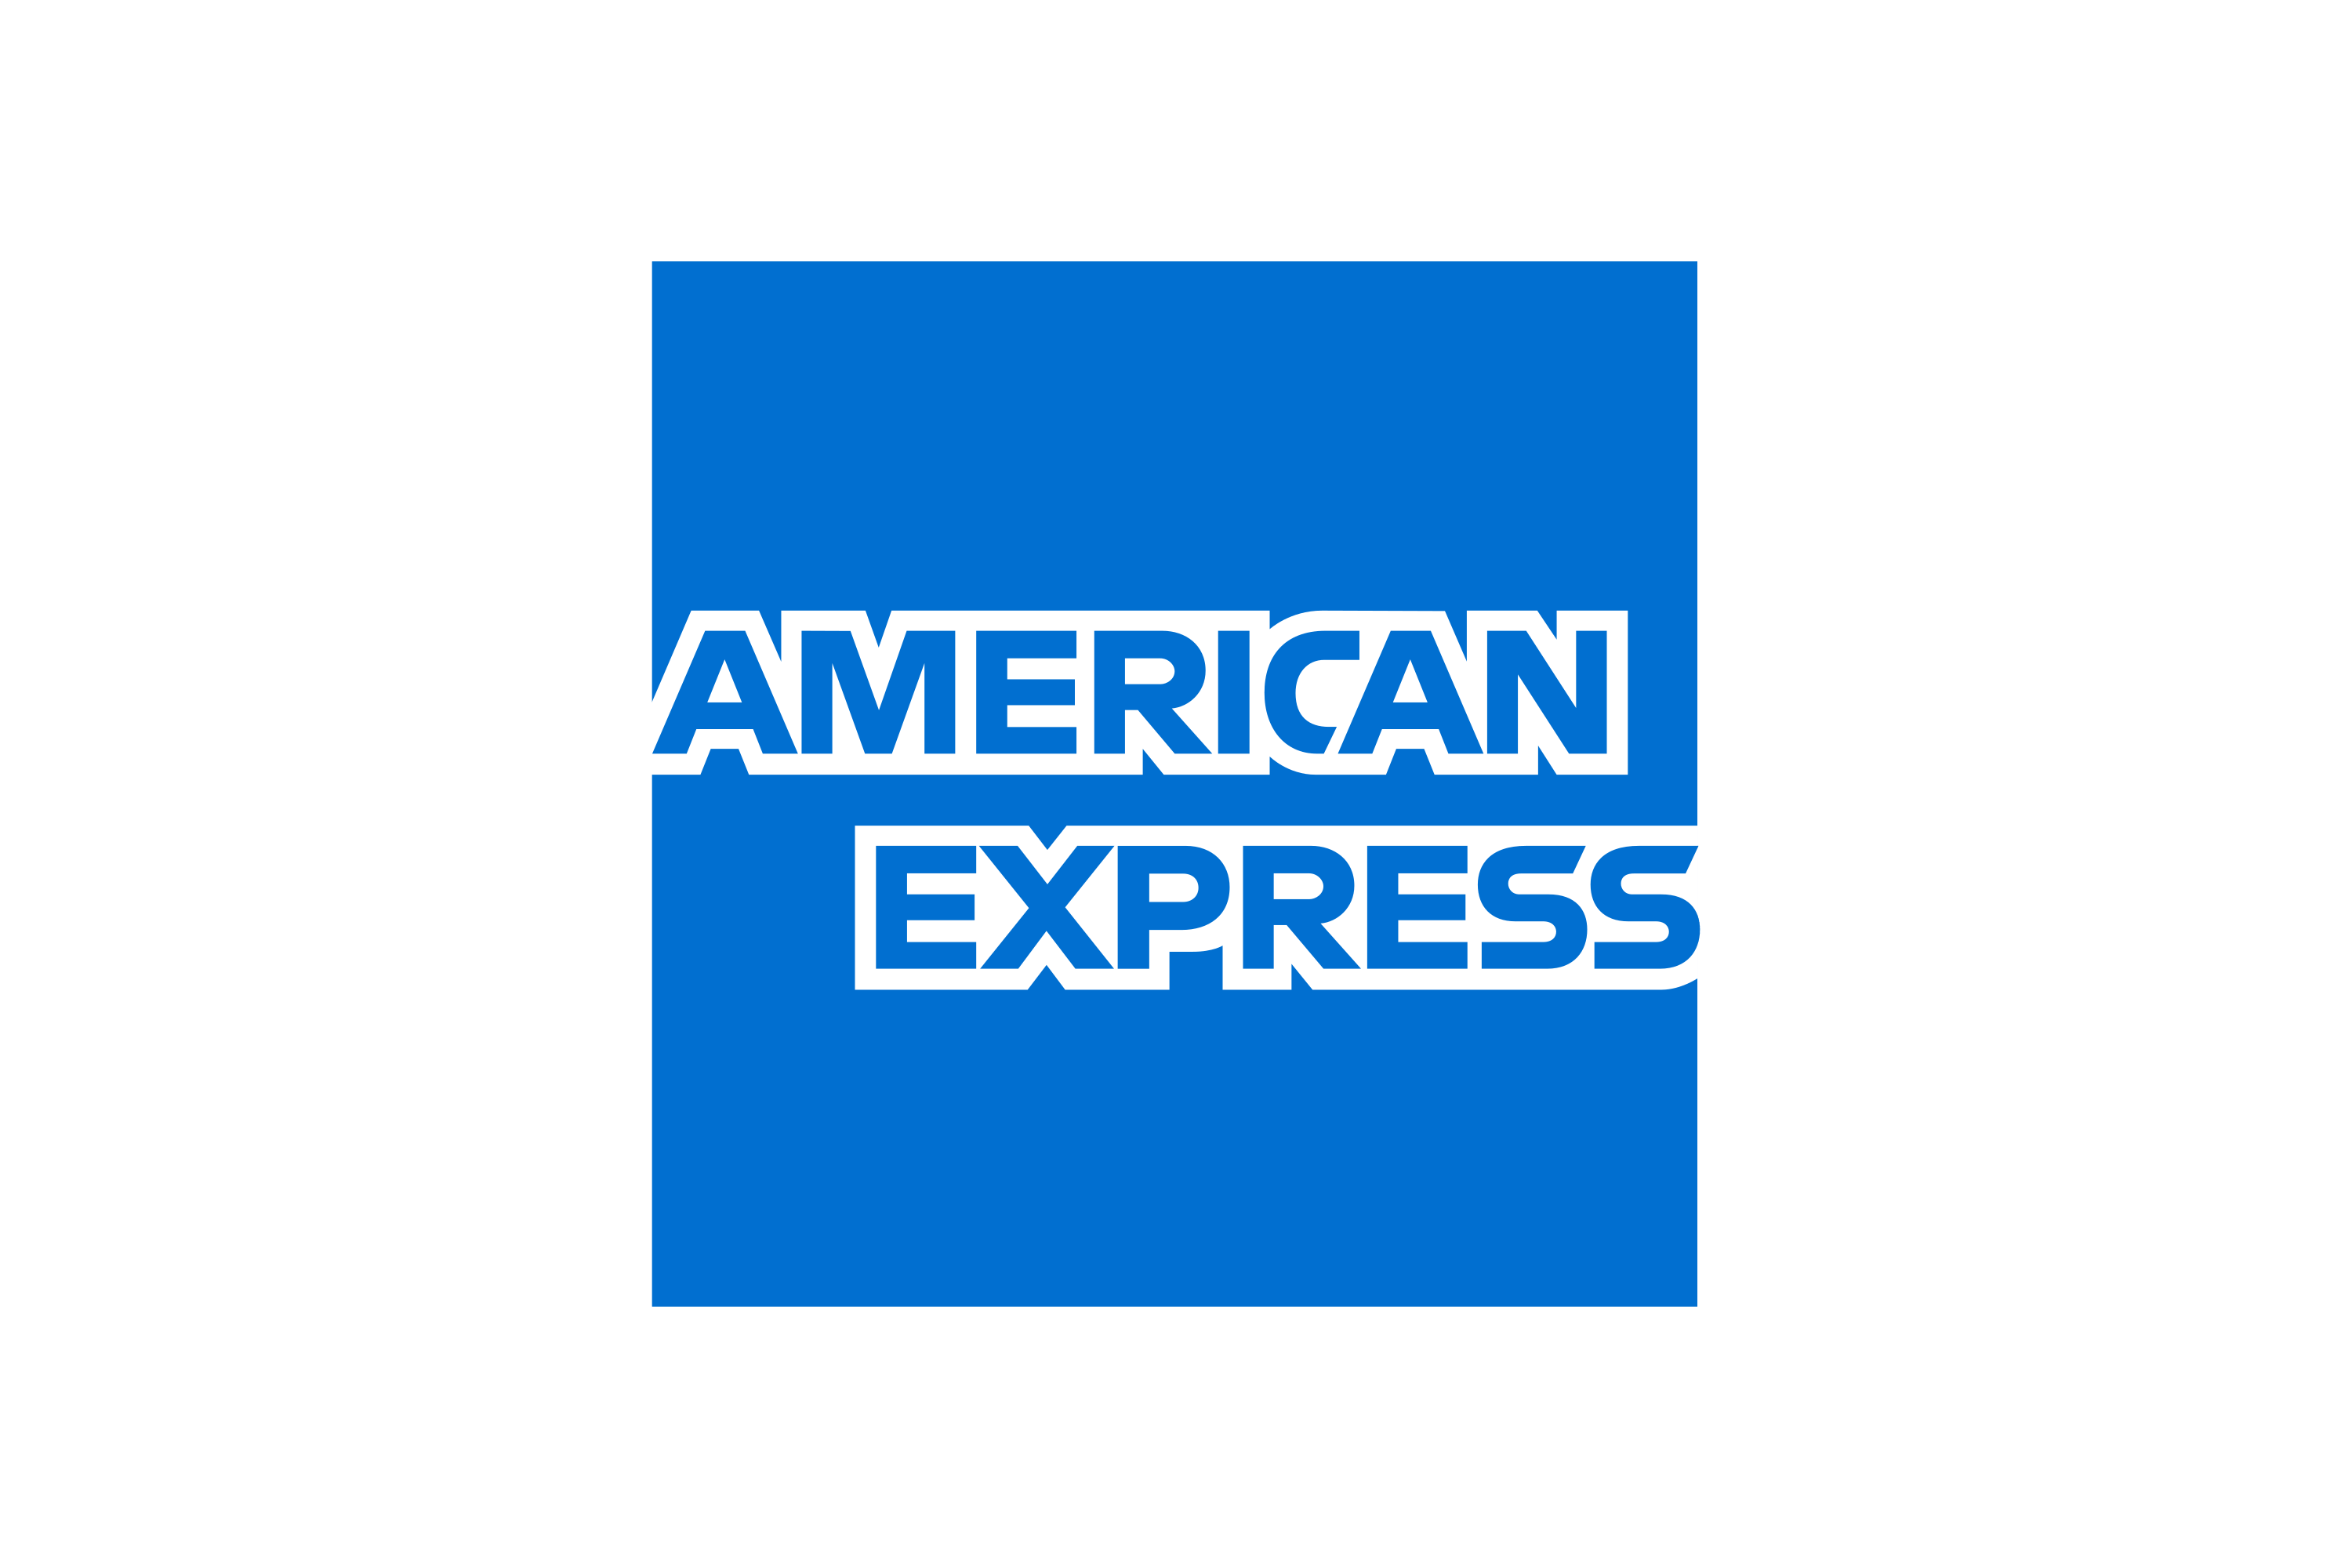 American Express UK Business Article Link - Project Harmless